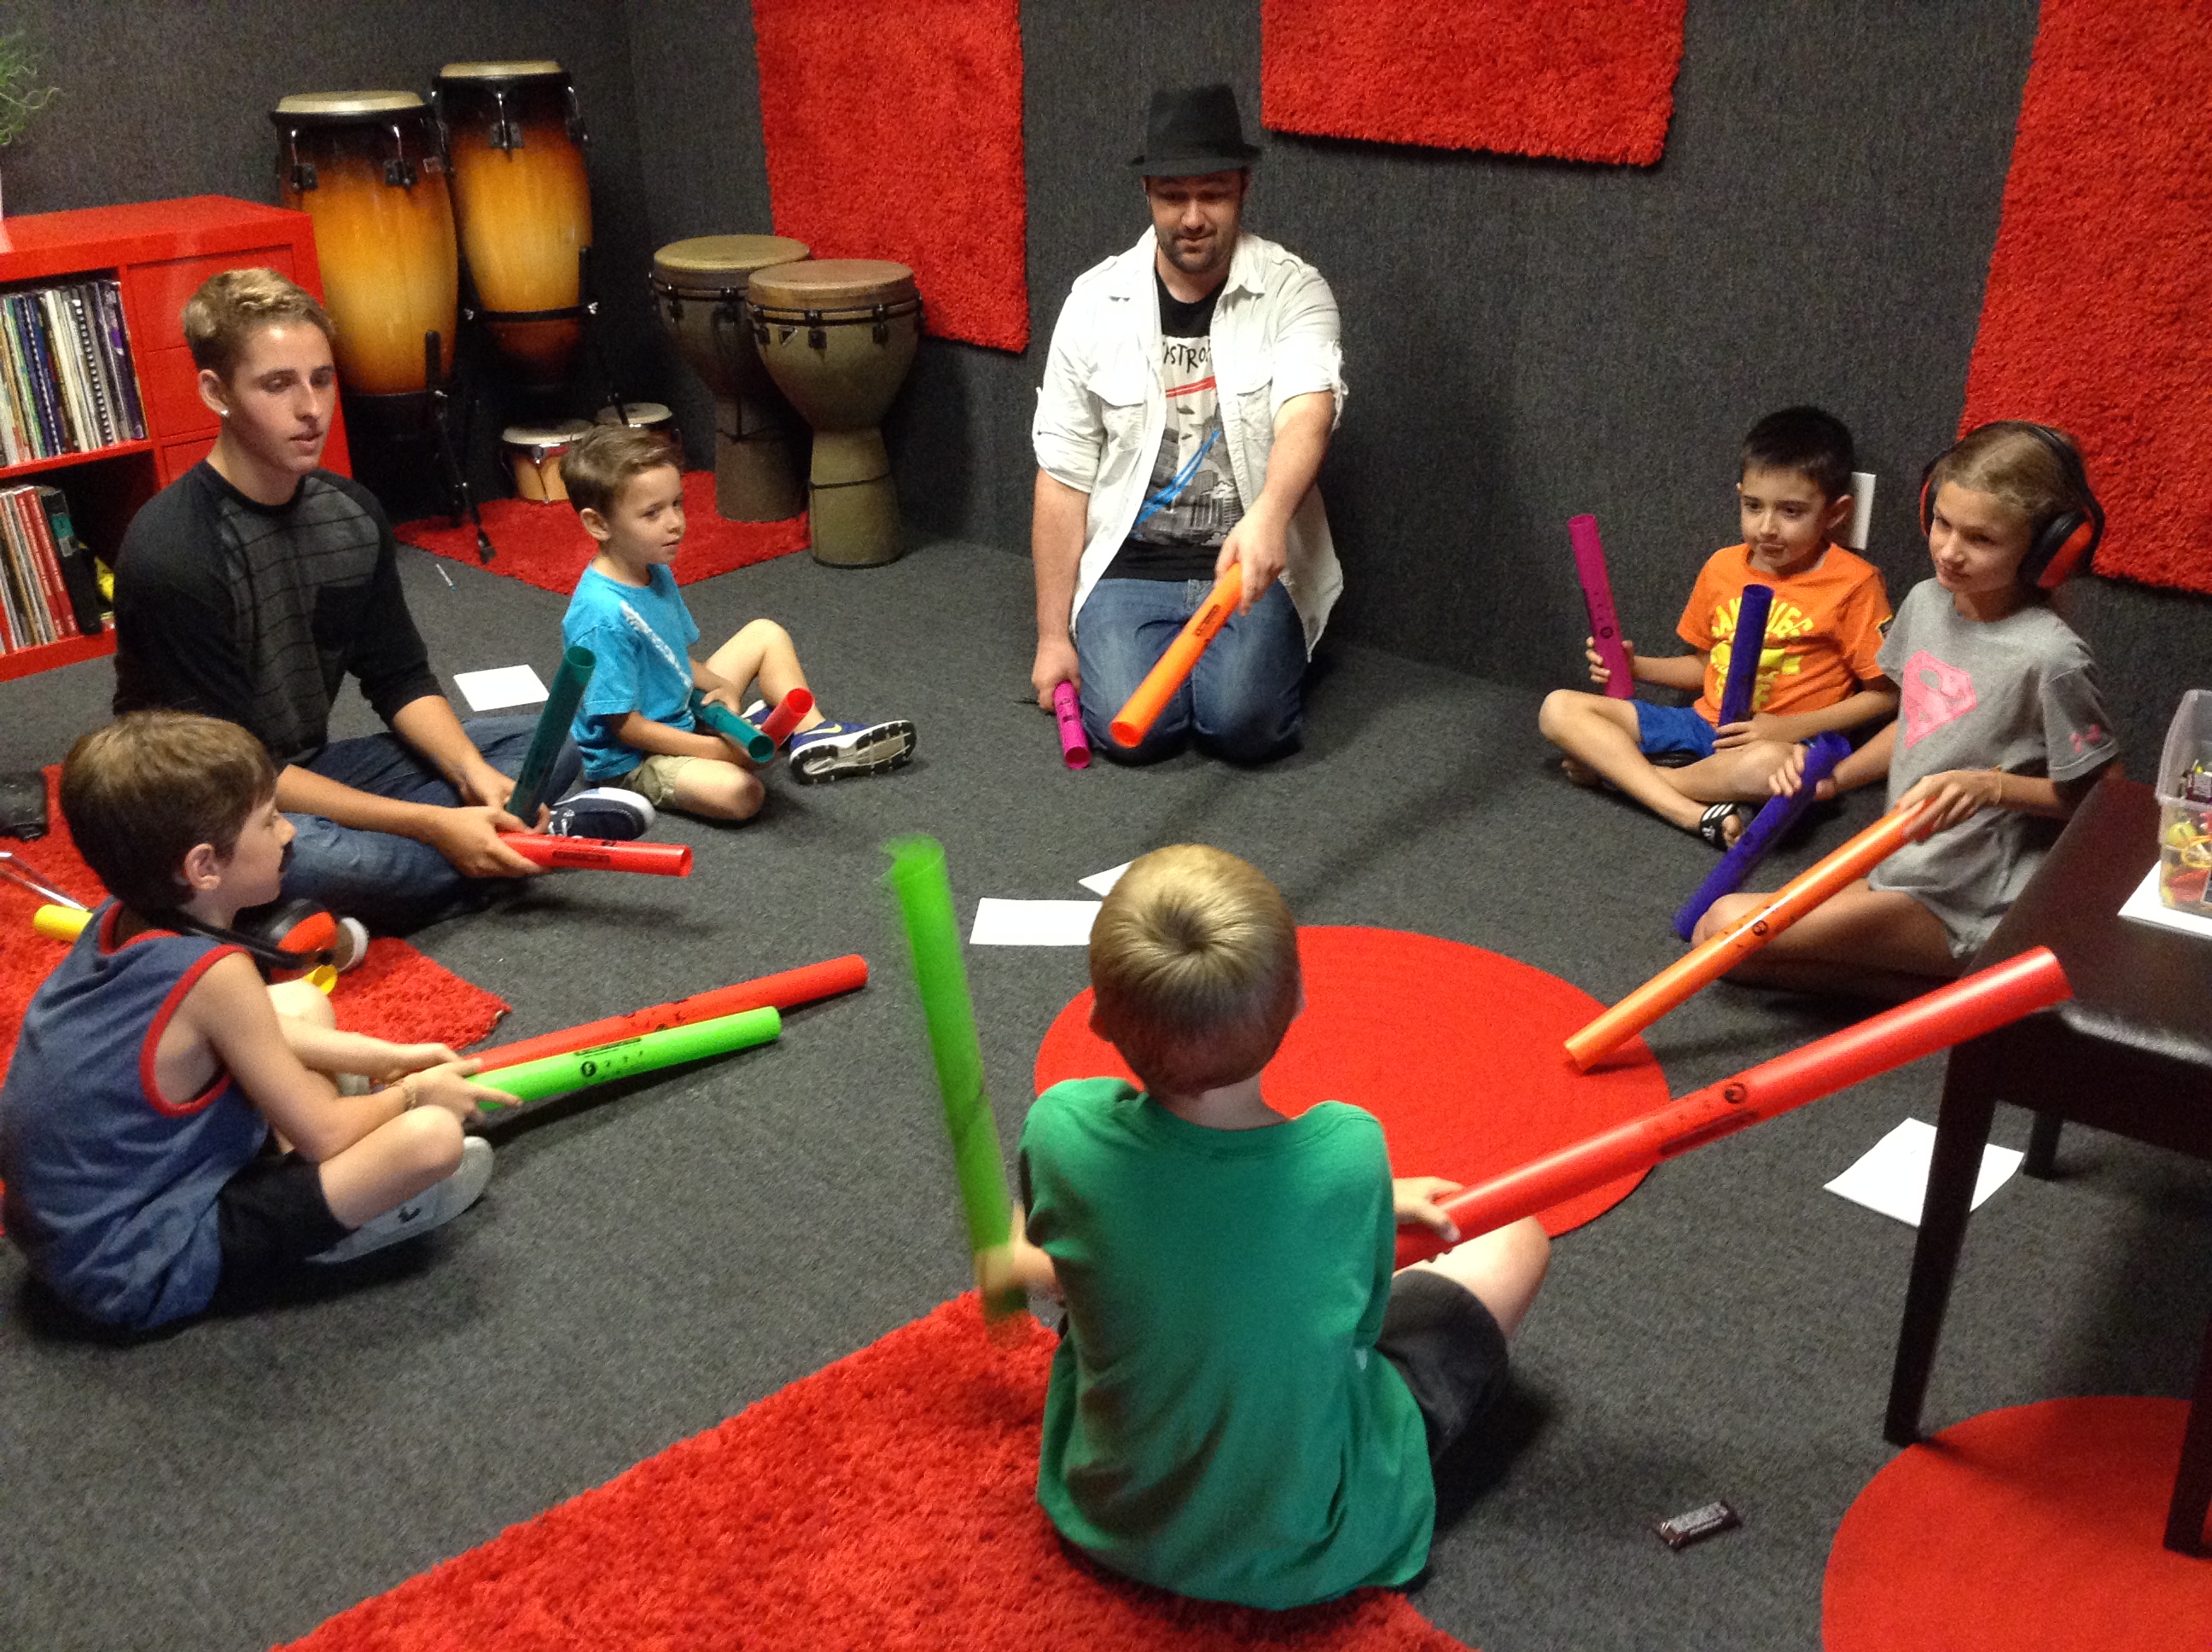 Group music classes for kids in Temecula, CA